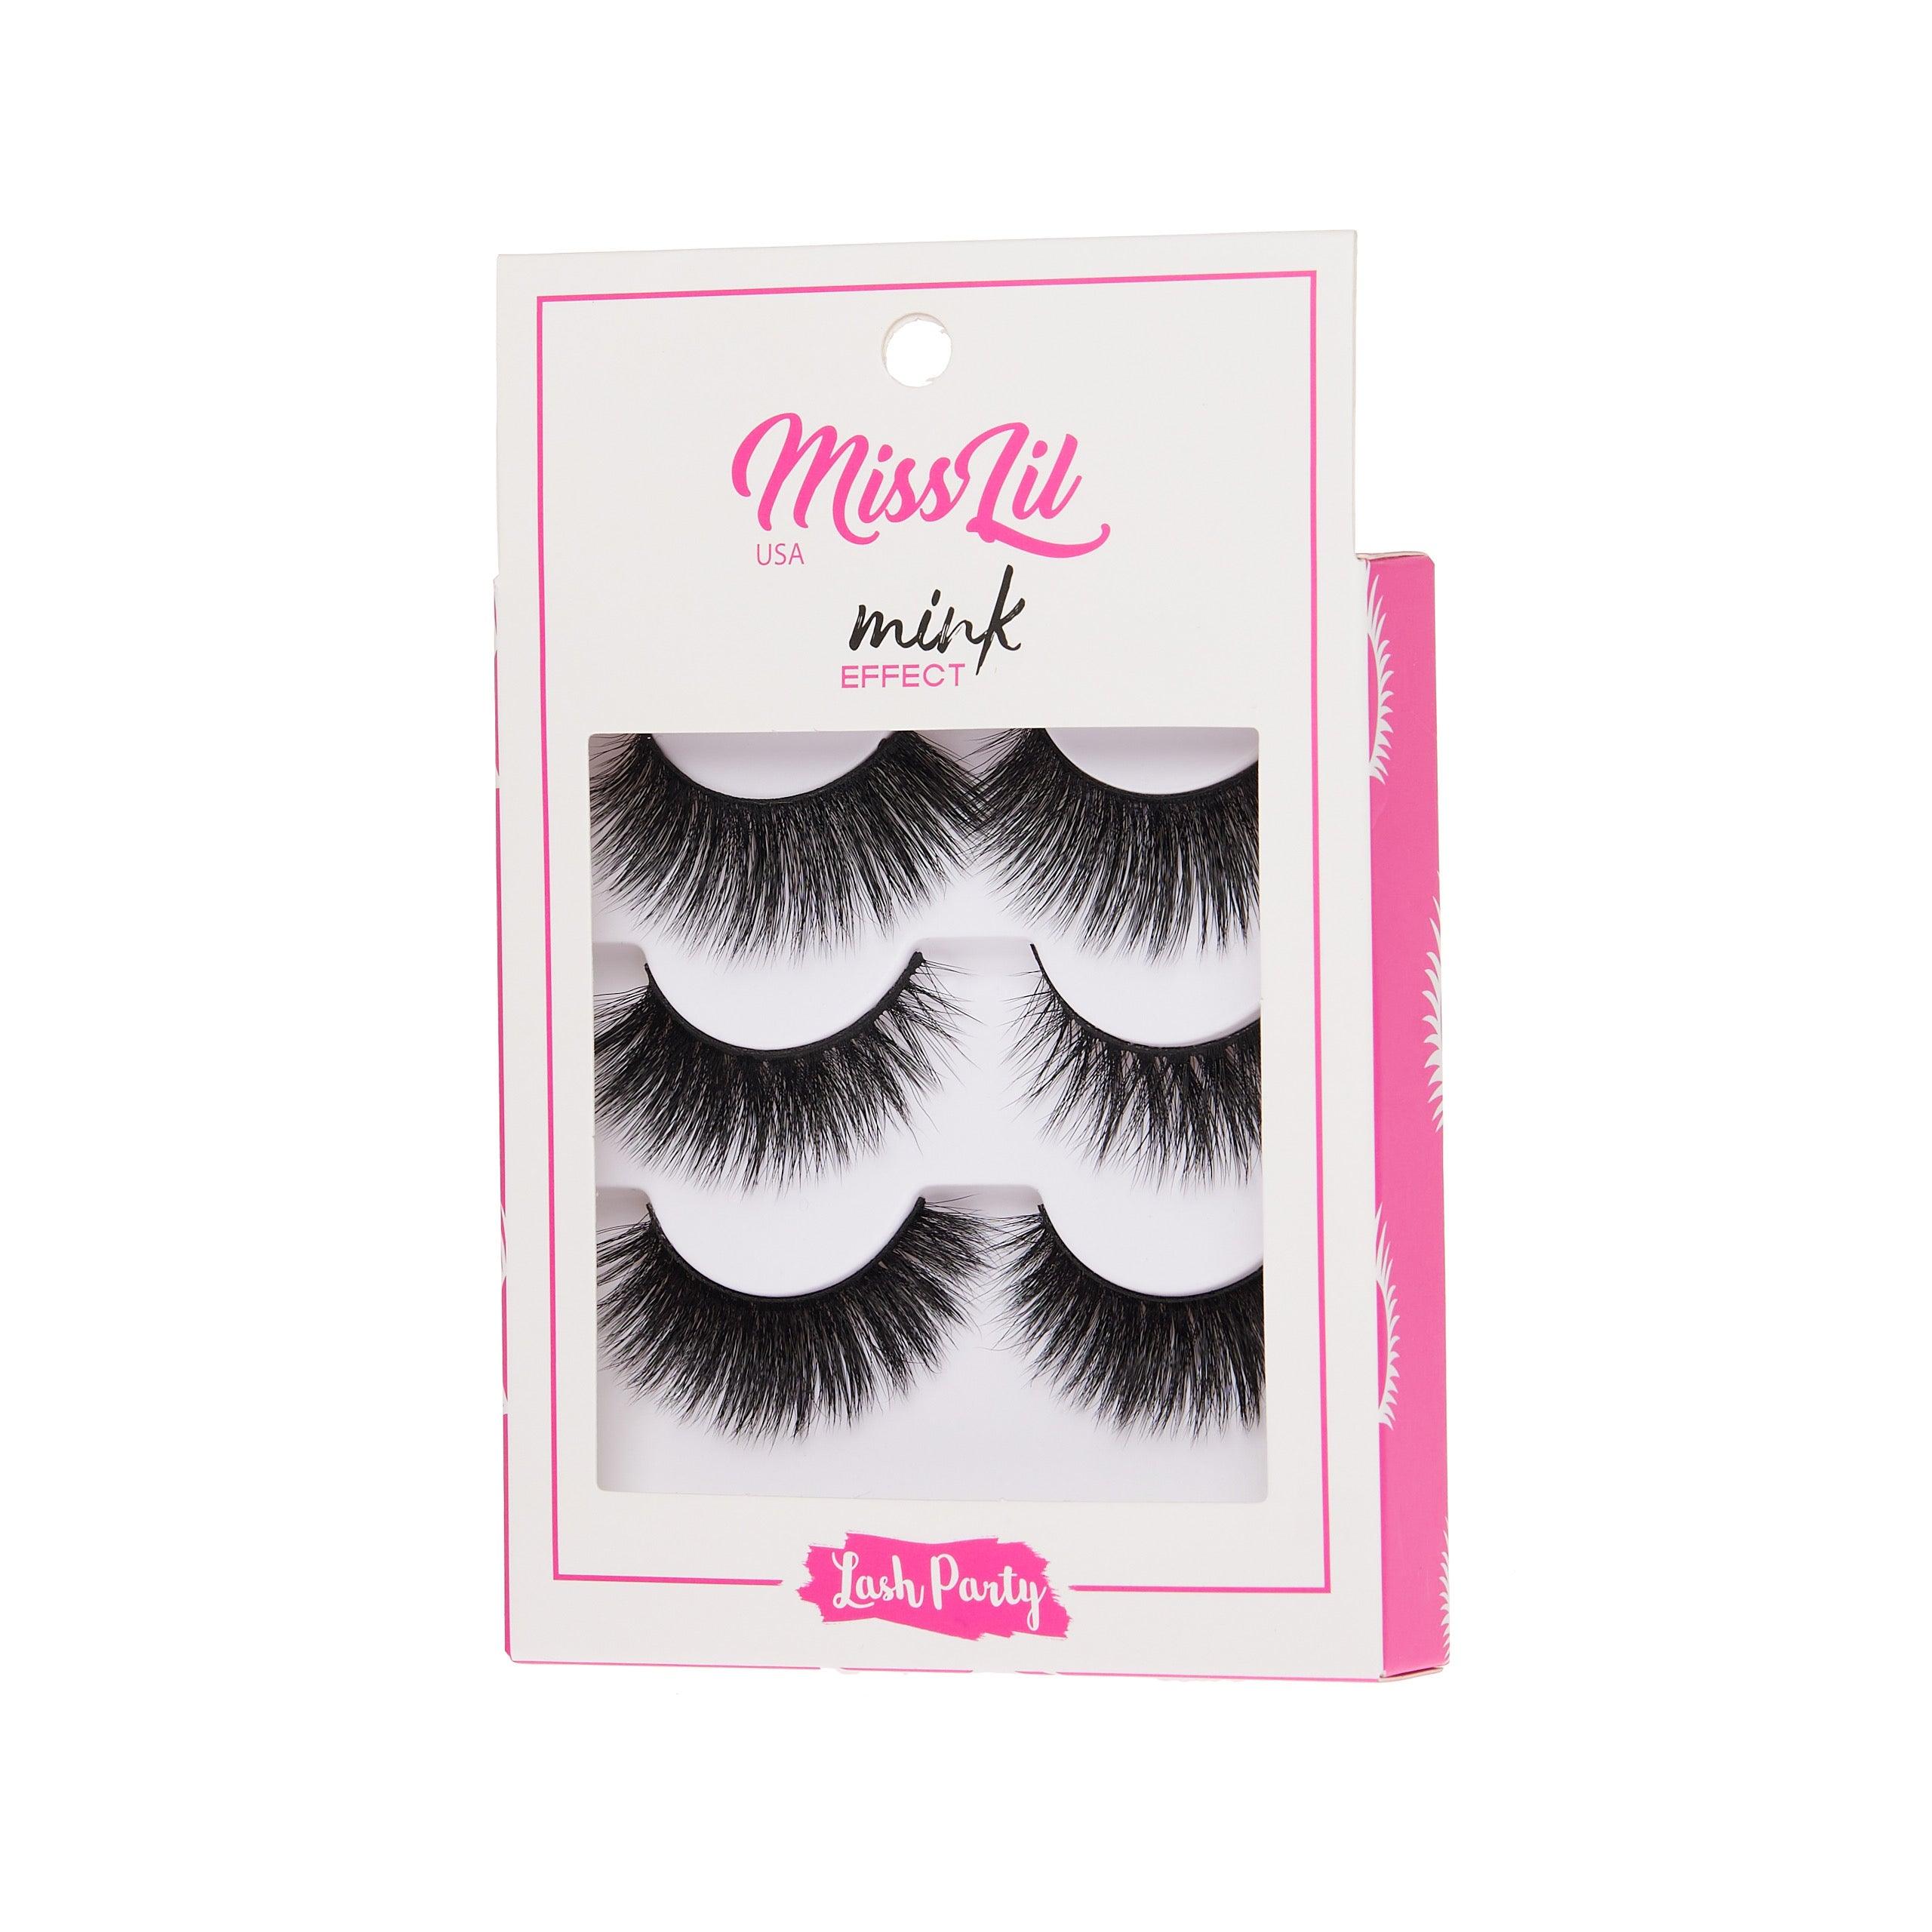 3-Pair Faux Mink Effect Eyelashes - Lash Party Collection #13 - Pack of 3 - Miss Lil USA